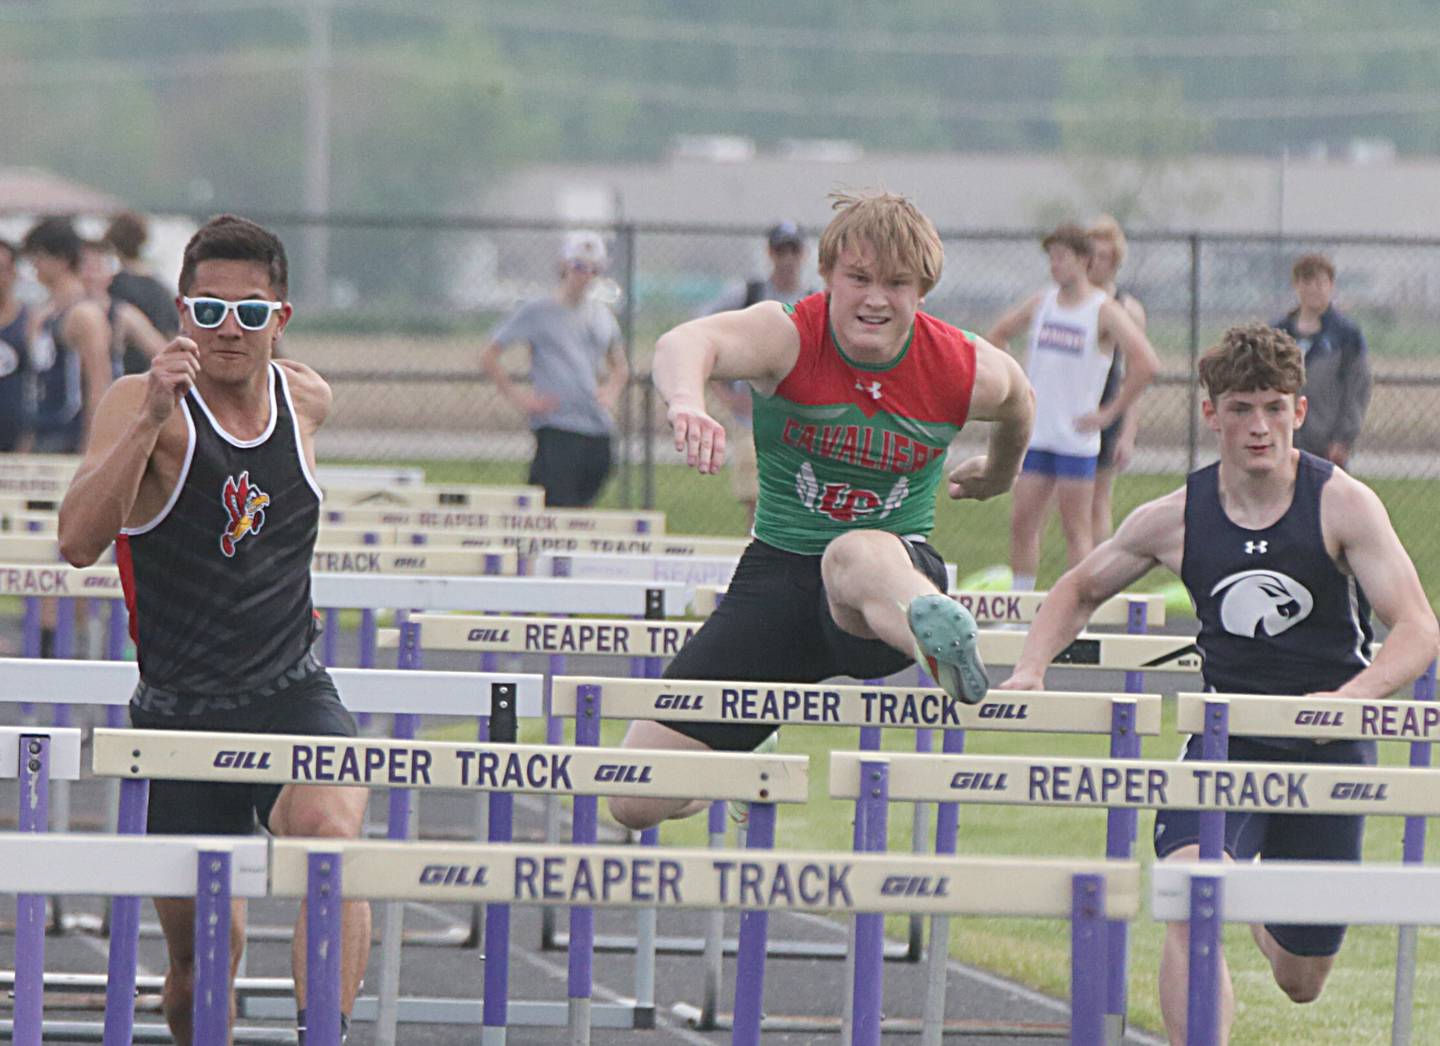 Jason Huang and La Salle-Peru's Brett Aimone compete in the 110 meter hurdles in the Class 1A Boys Sectional track meet on Friday, May 20, 2022 in Plano.